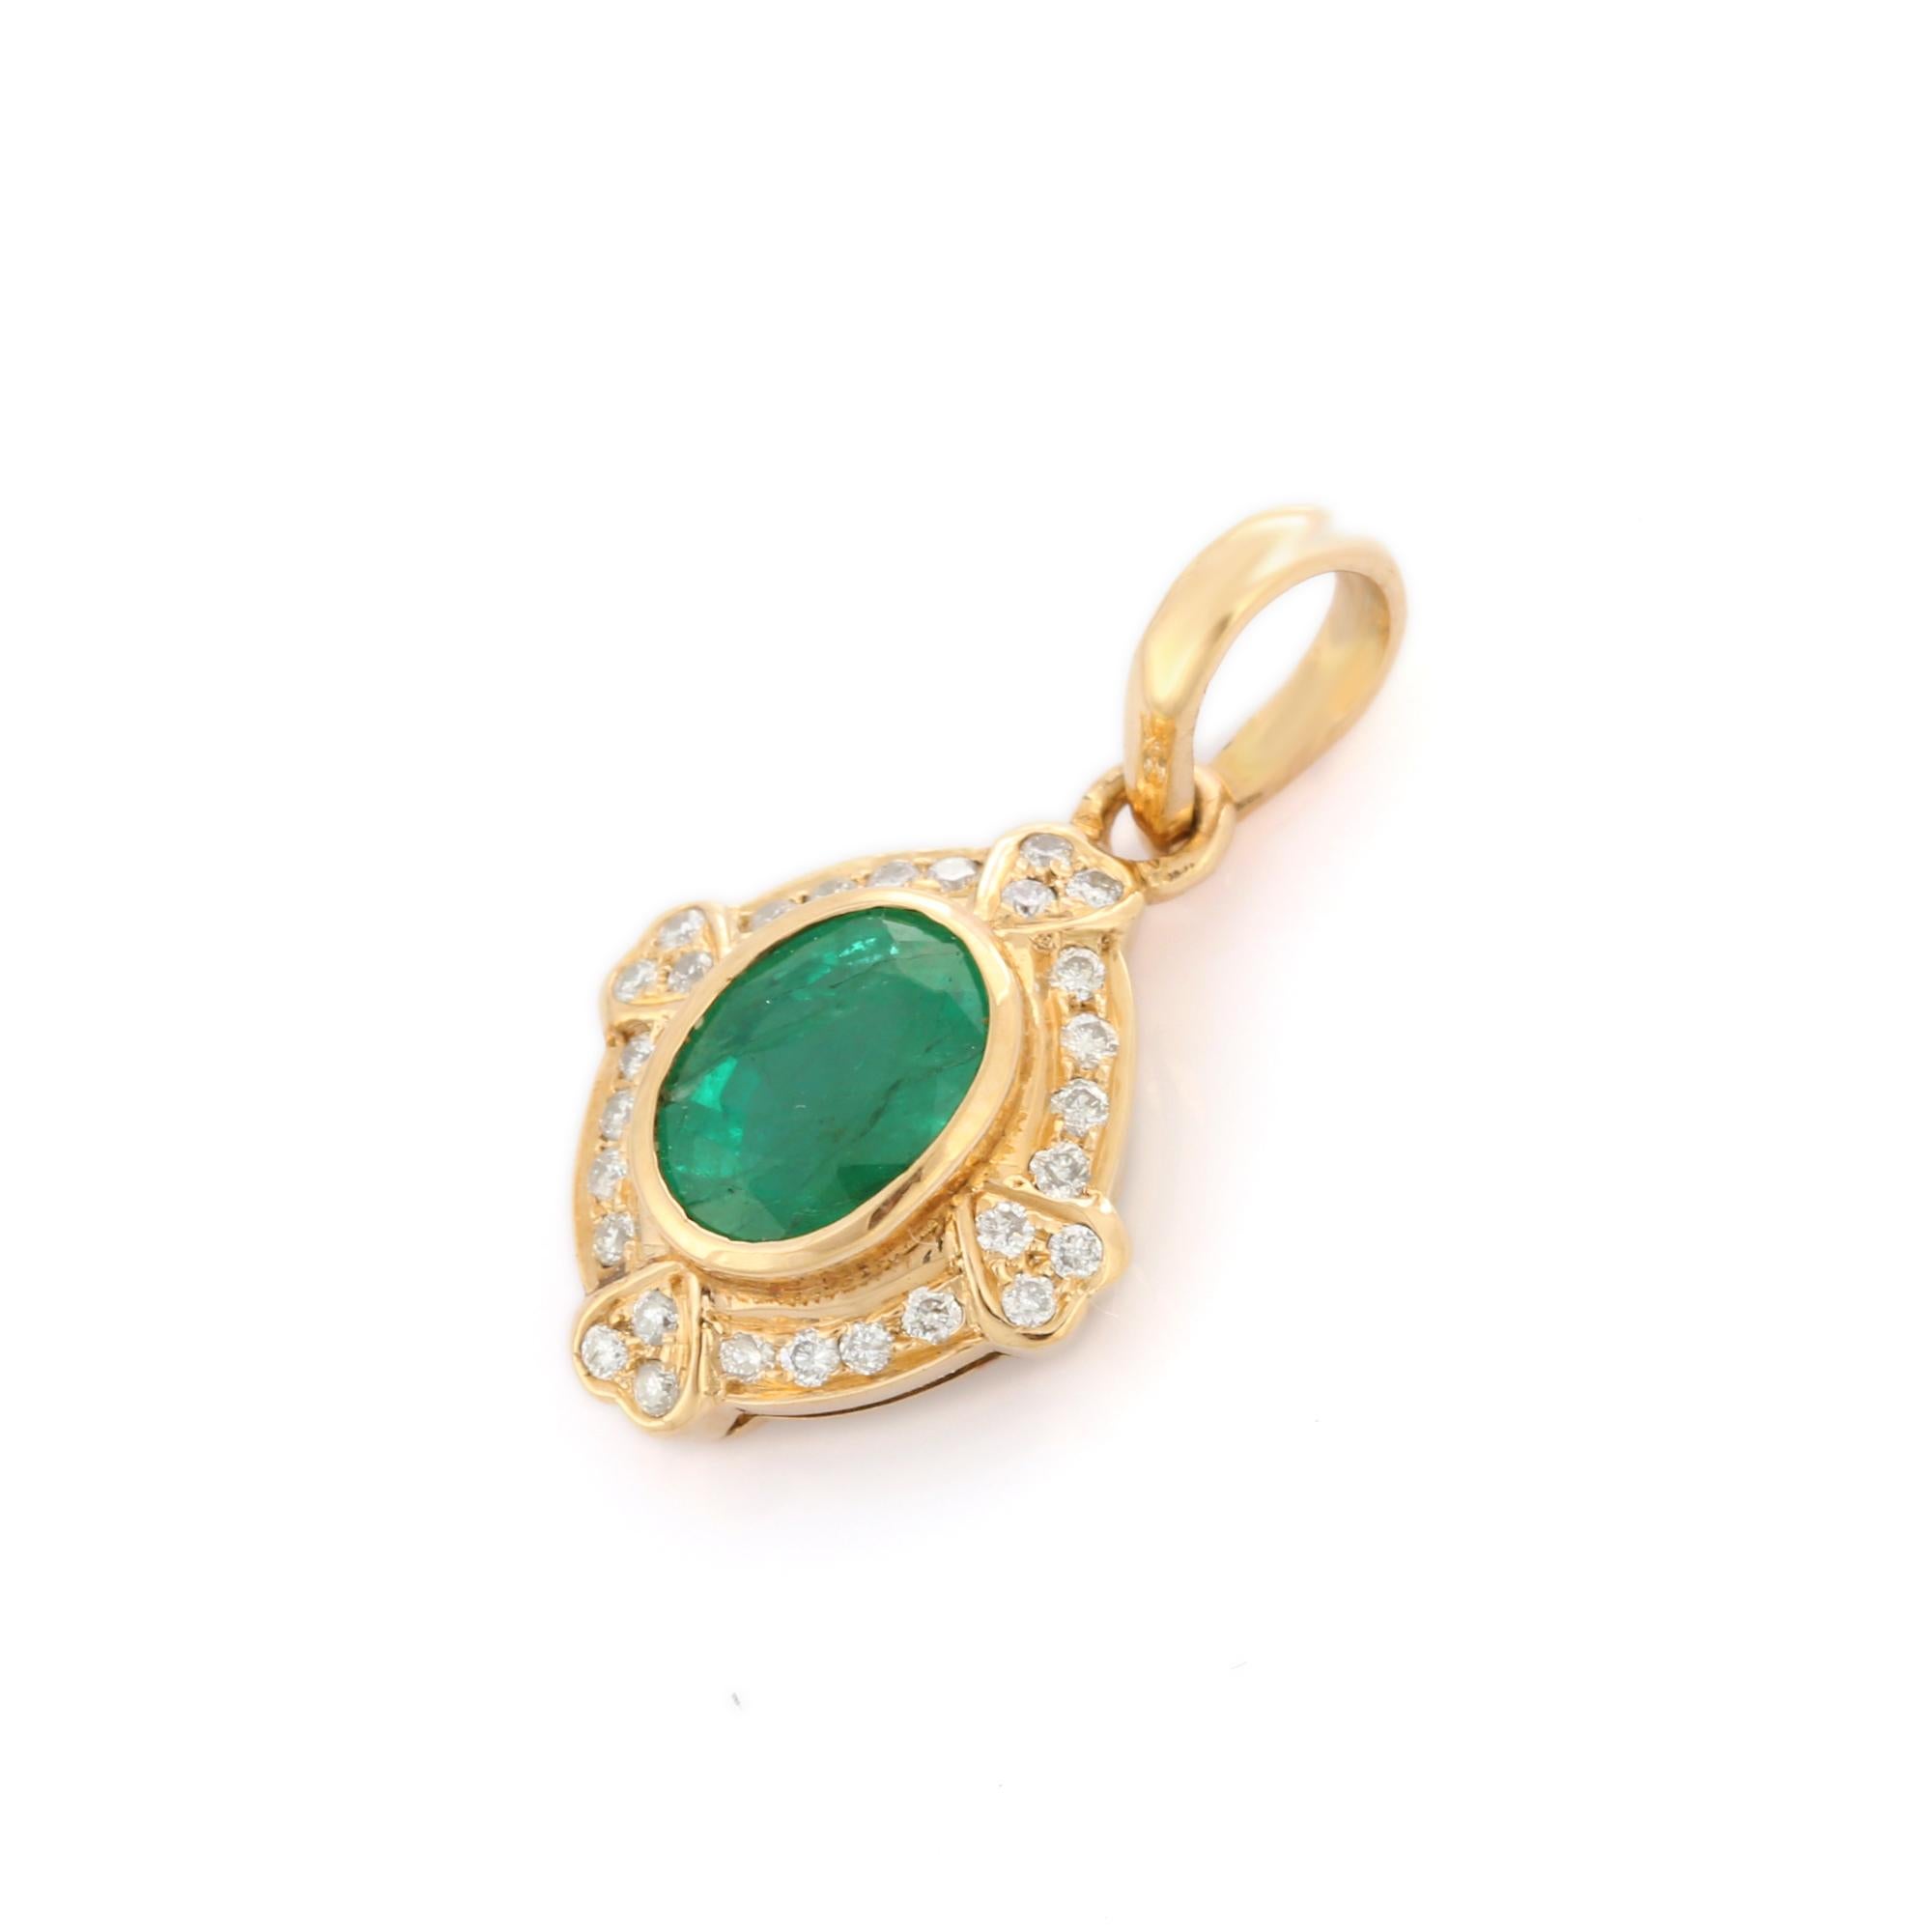 1.62 Carat Natural Emerald Bezel Set Diamond Pendant in 14K Yellow Gold In New Condition For Sale In Houston, TX